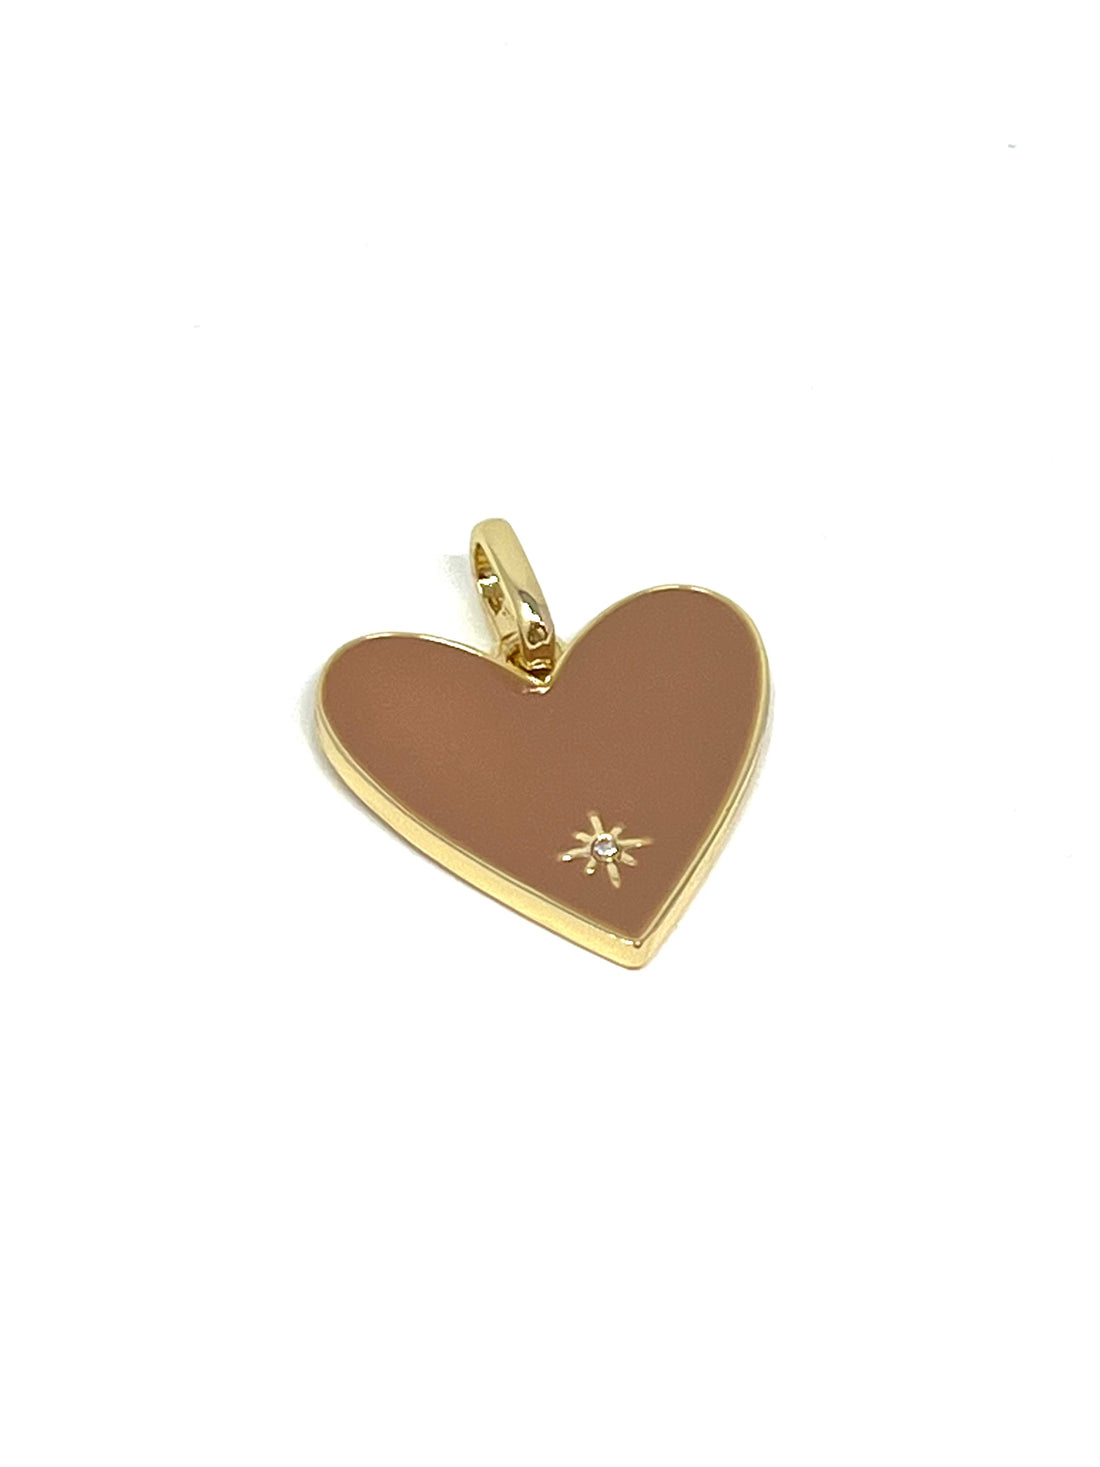 Charming Enamel Heart with Stone Charm in Nude